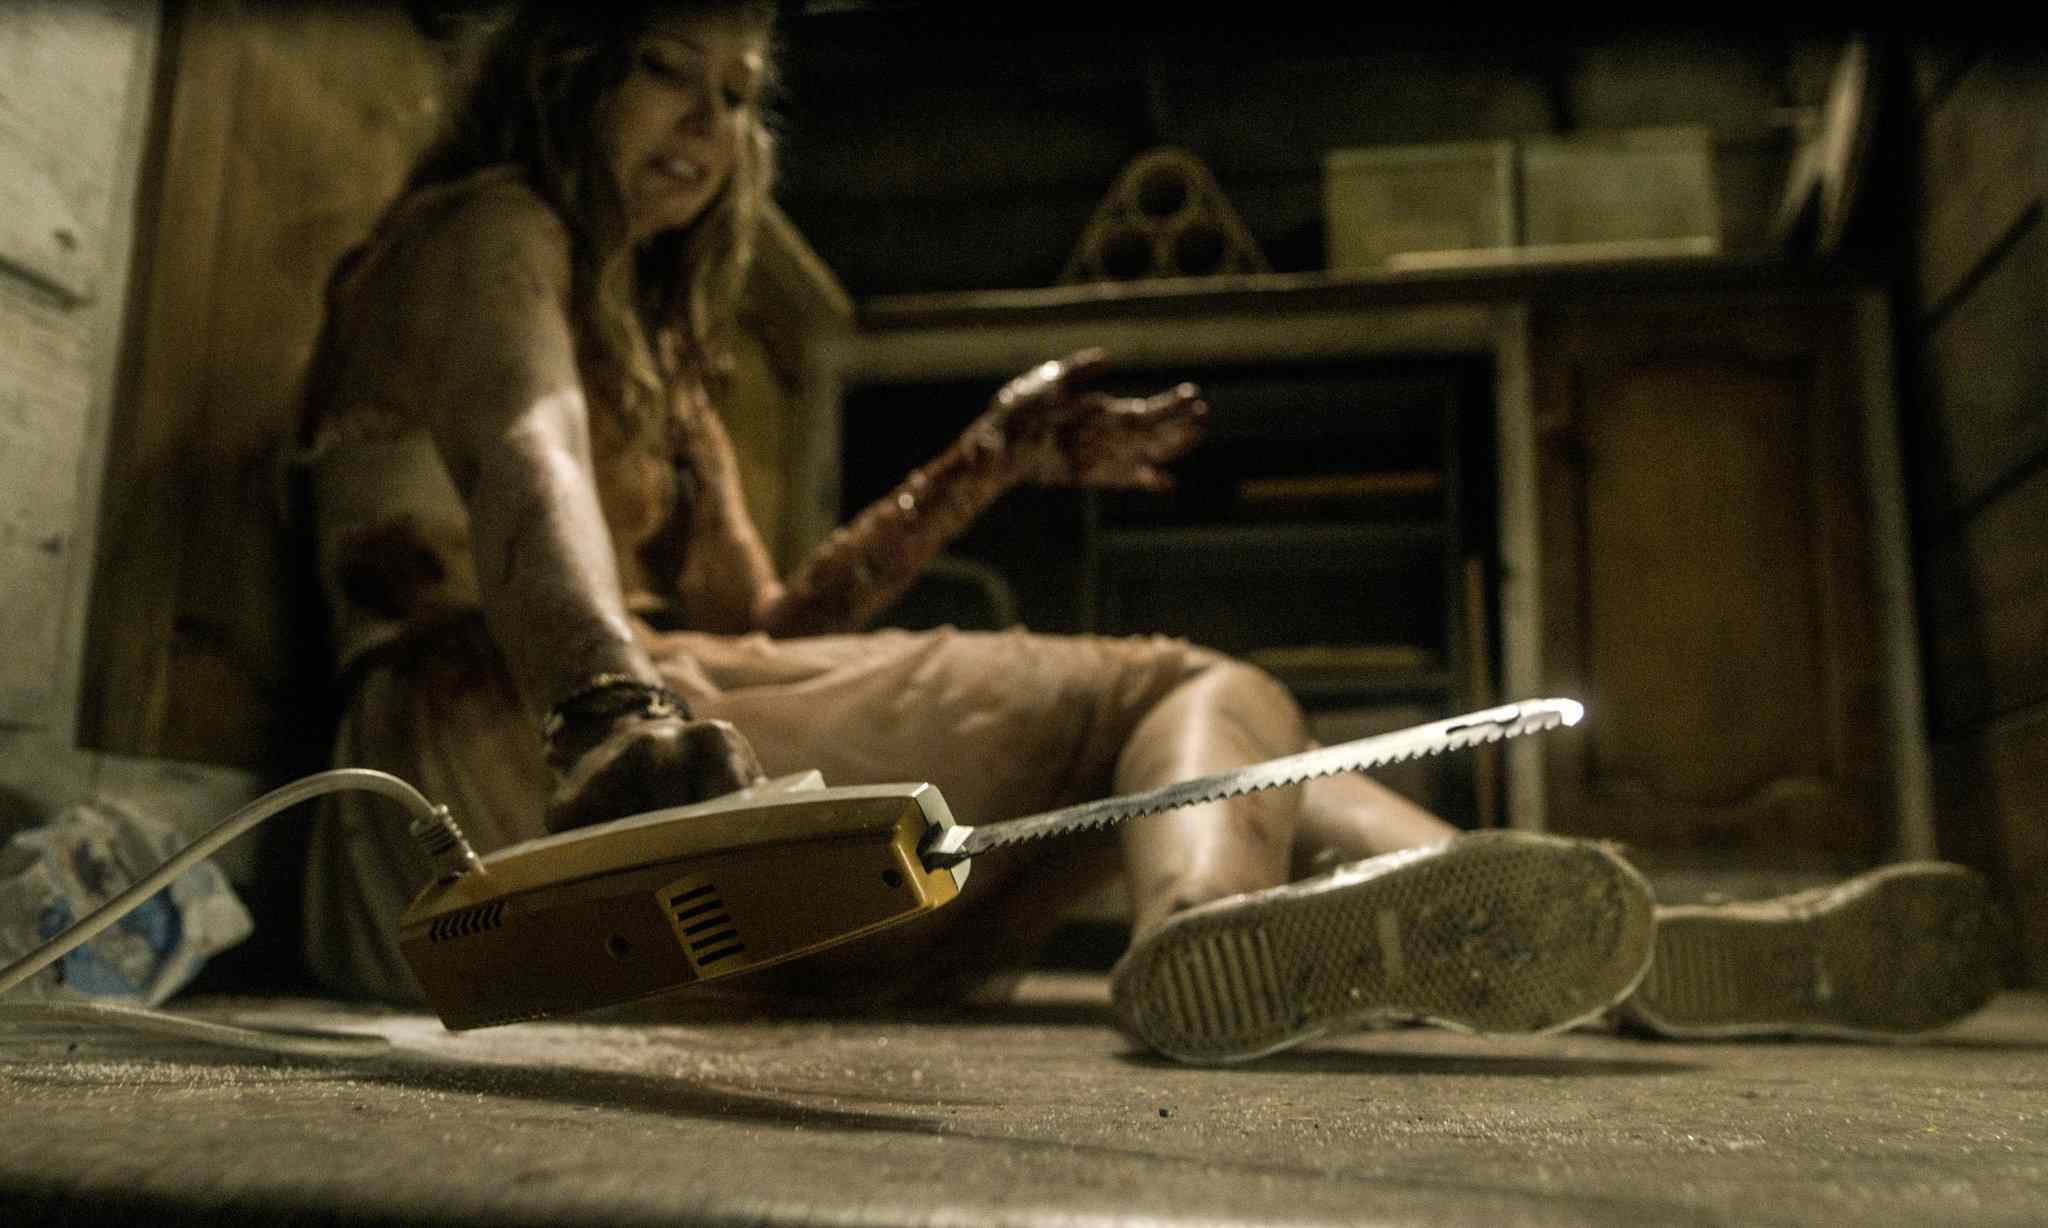 Natalie (Elizabeth Blackmore) in Fede Alvarez's Evil Dead 2013, about to cut her arm off with an electric carving knife.